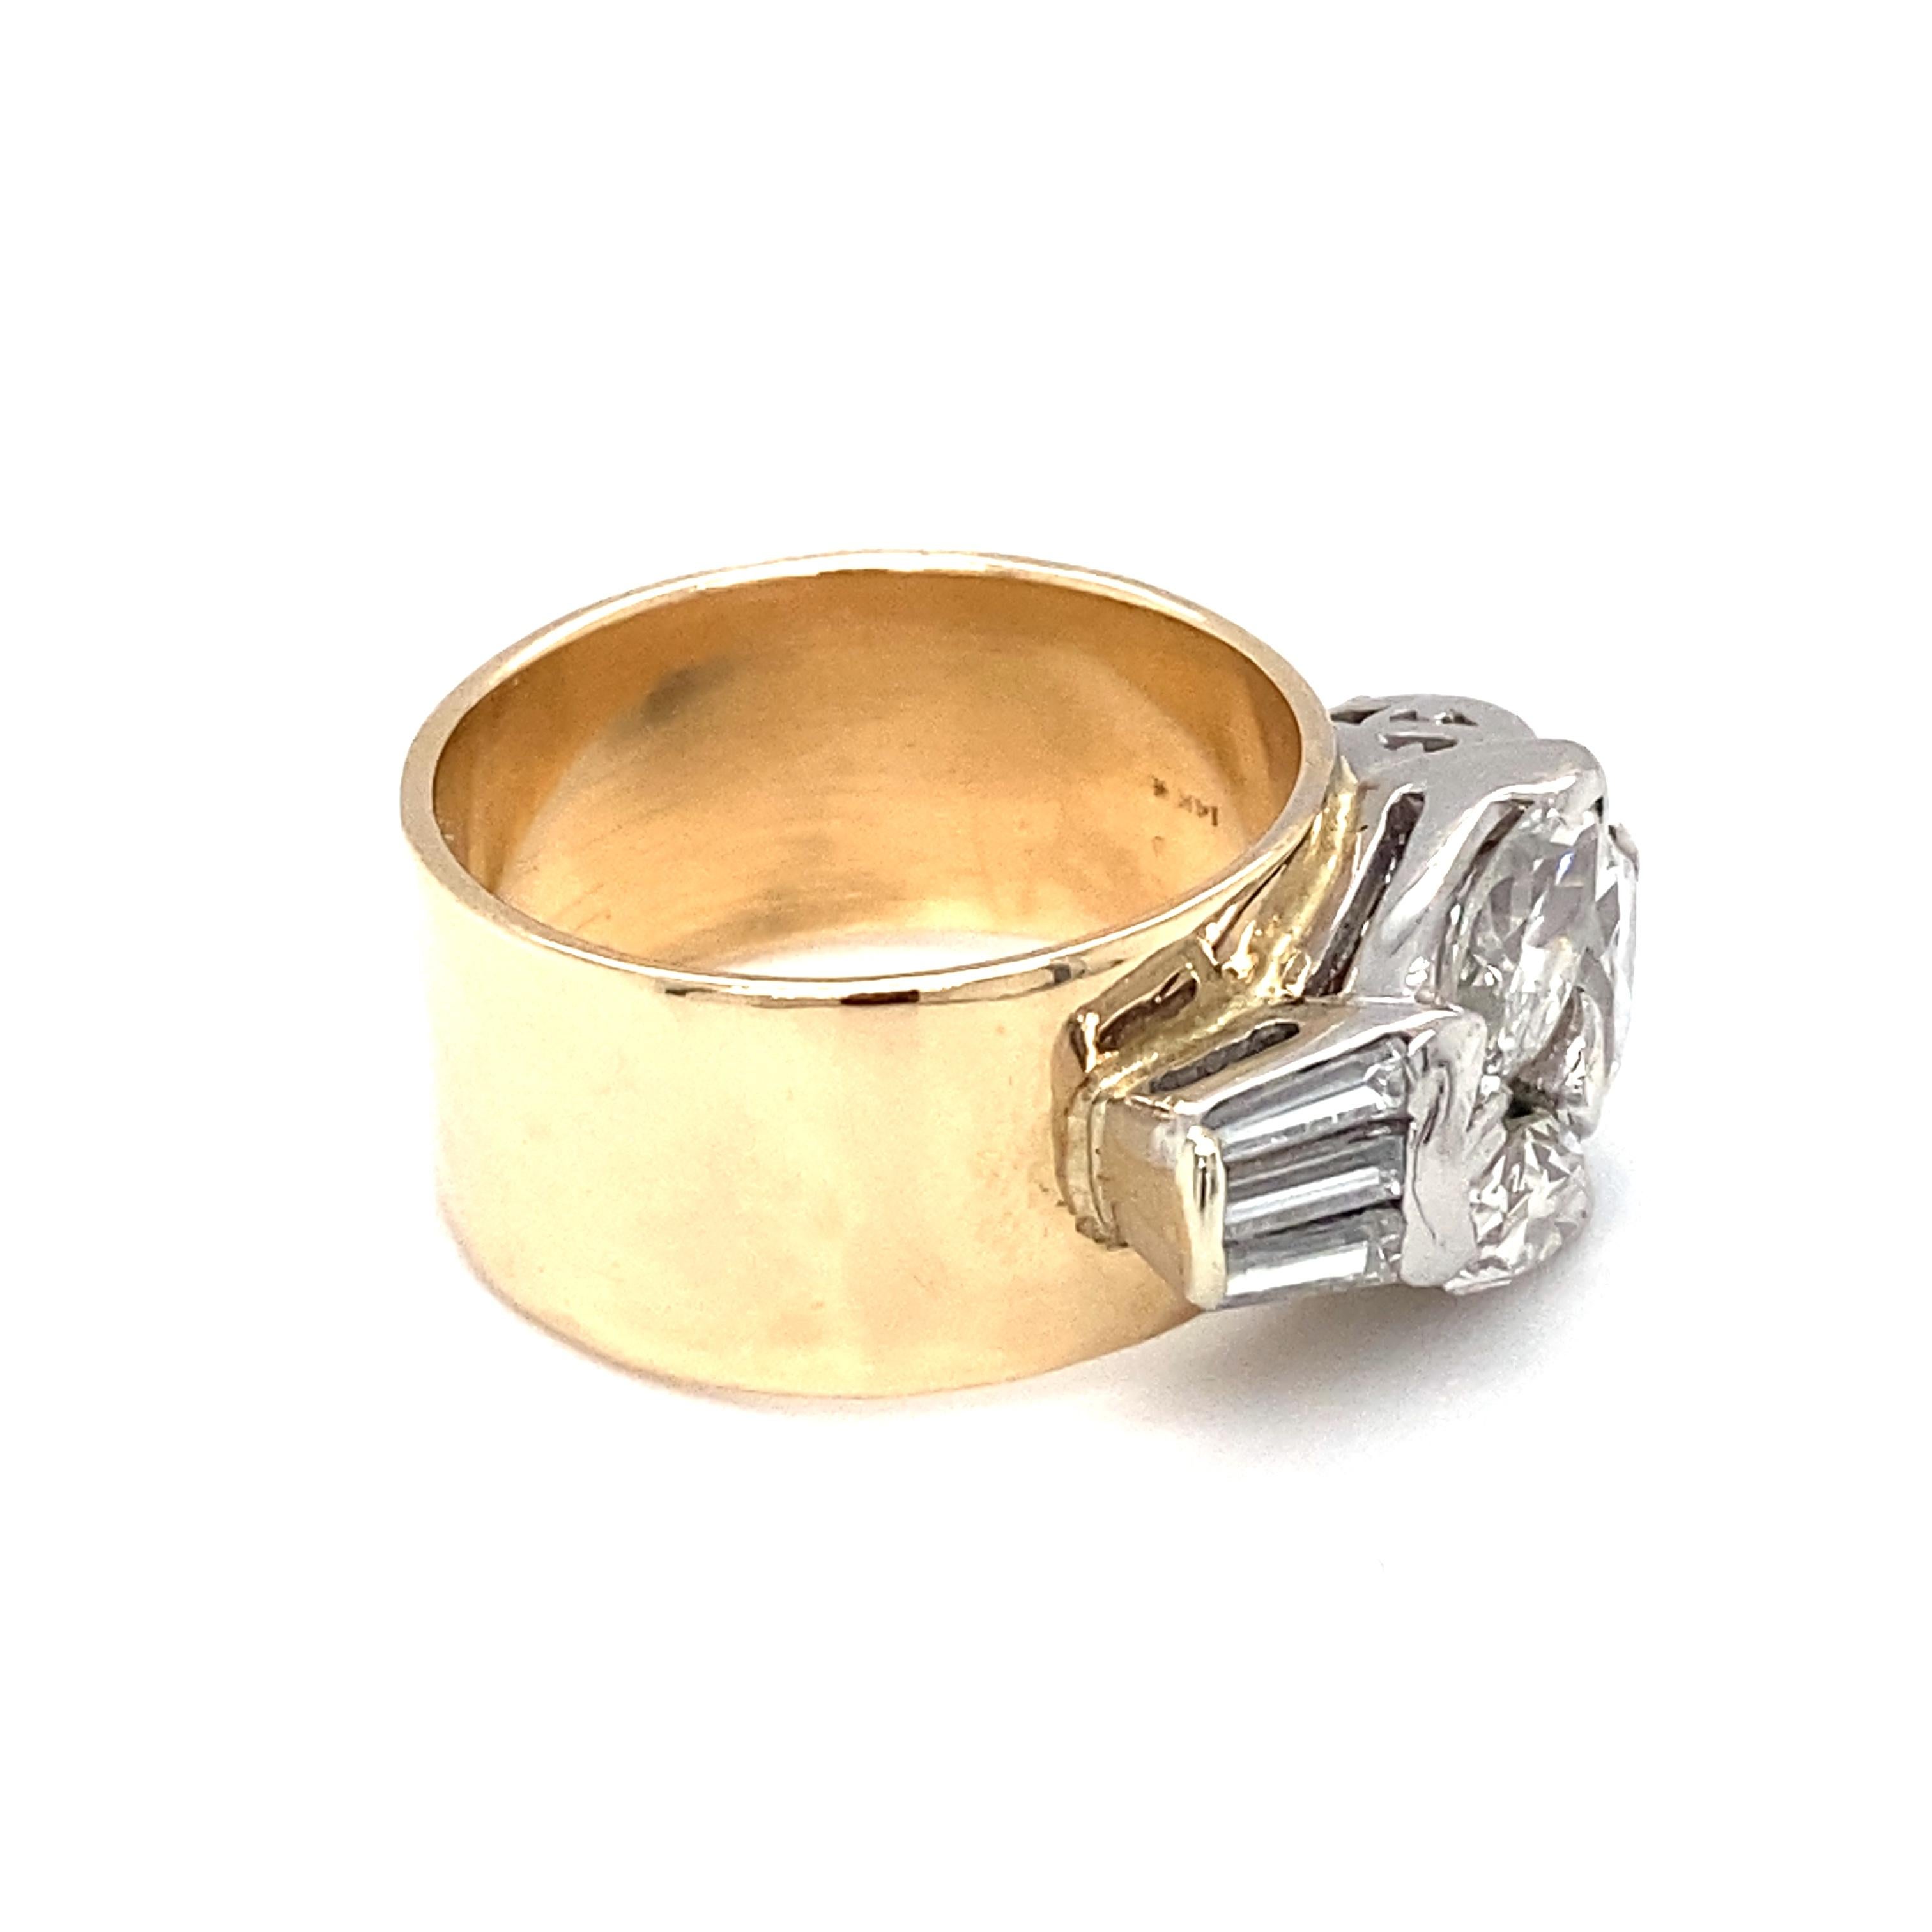 Marquise Cut Circa 1920s 2.32 Carat Diamond Ring in 14 Karat Two Tone Gold For Sale